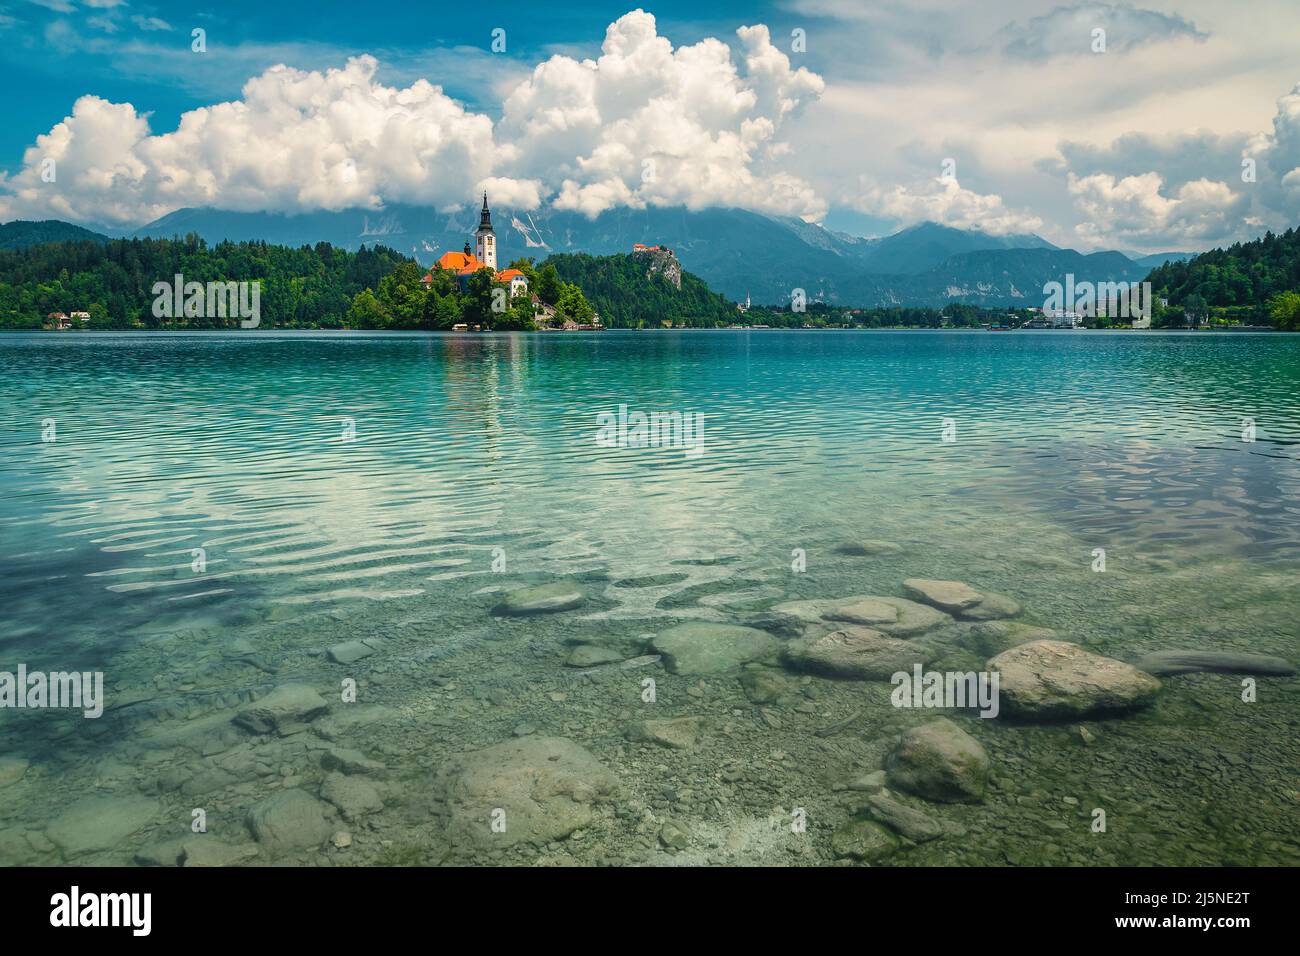 Picturesque transparent clean lake with famous church on the small island, lake Bled, Slovenia, Europe Stock Photo